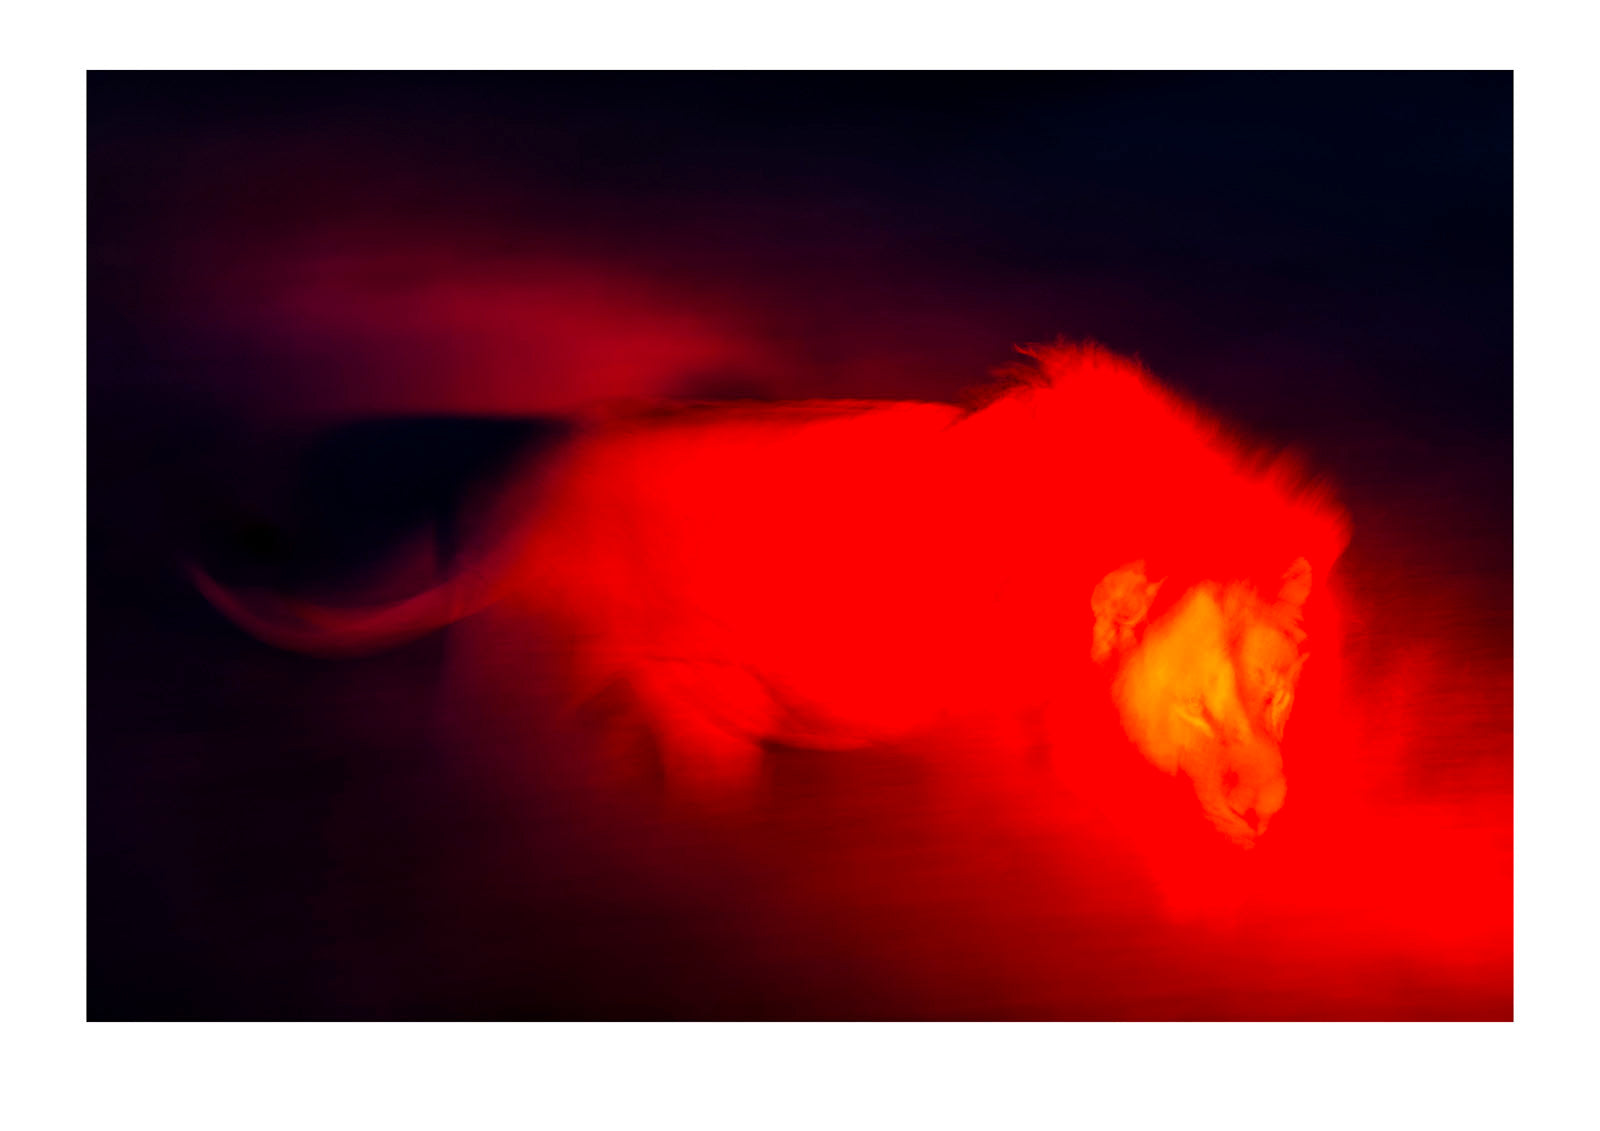 A large male African Lion, Panthera leo, stalks a herd of Red Lechwe, Kobus leche, under the beam of a ruby spotlight that doesn’t affect his behaviour. The primeval power and menace of the big cat moving through the inky night elicited distress calls from potential prey across the floodplain.